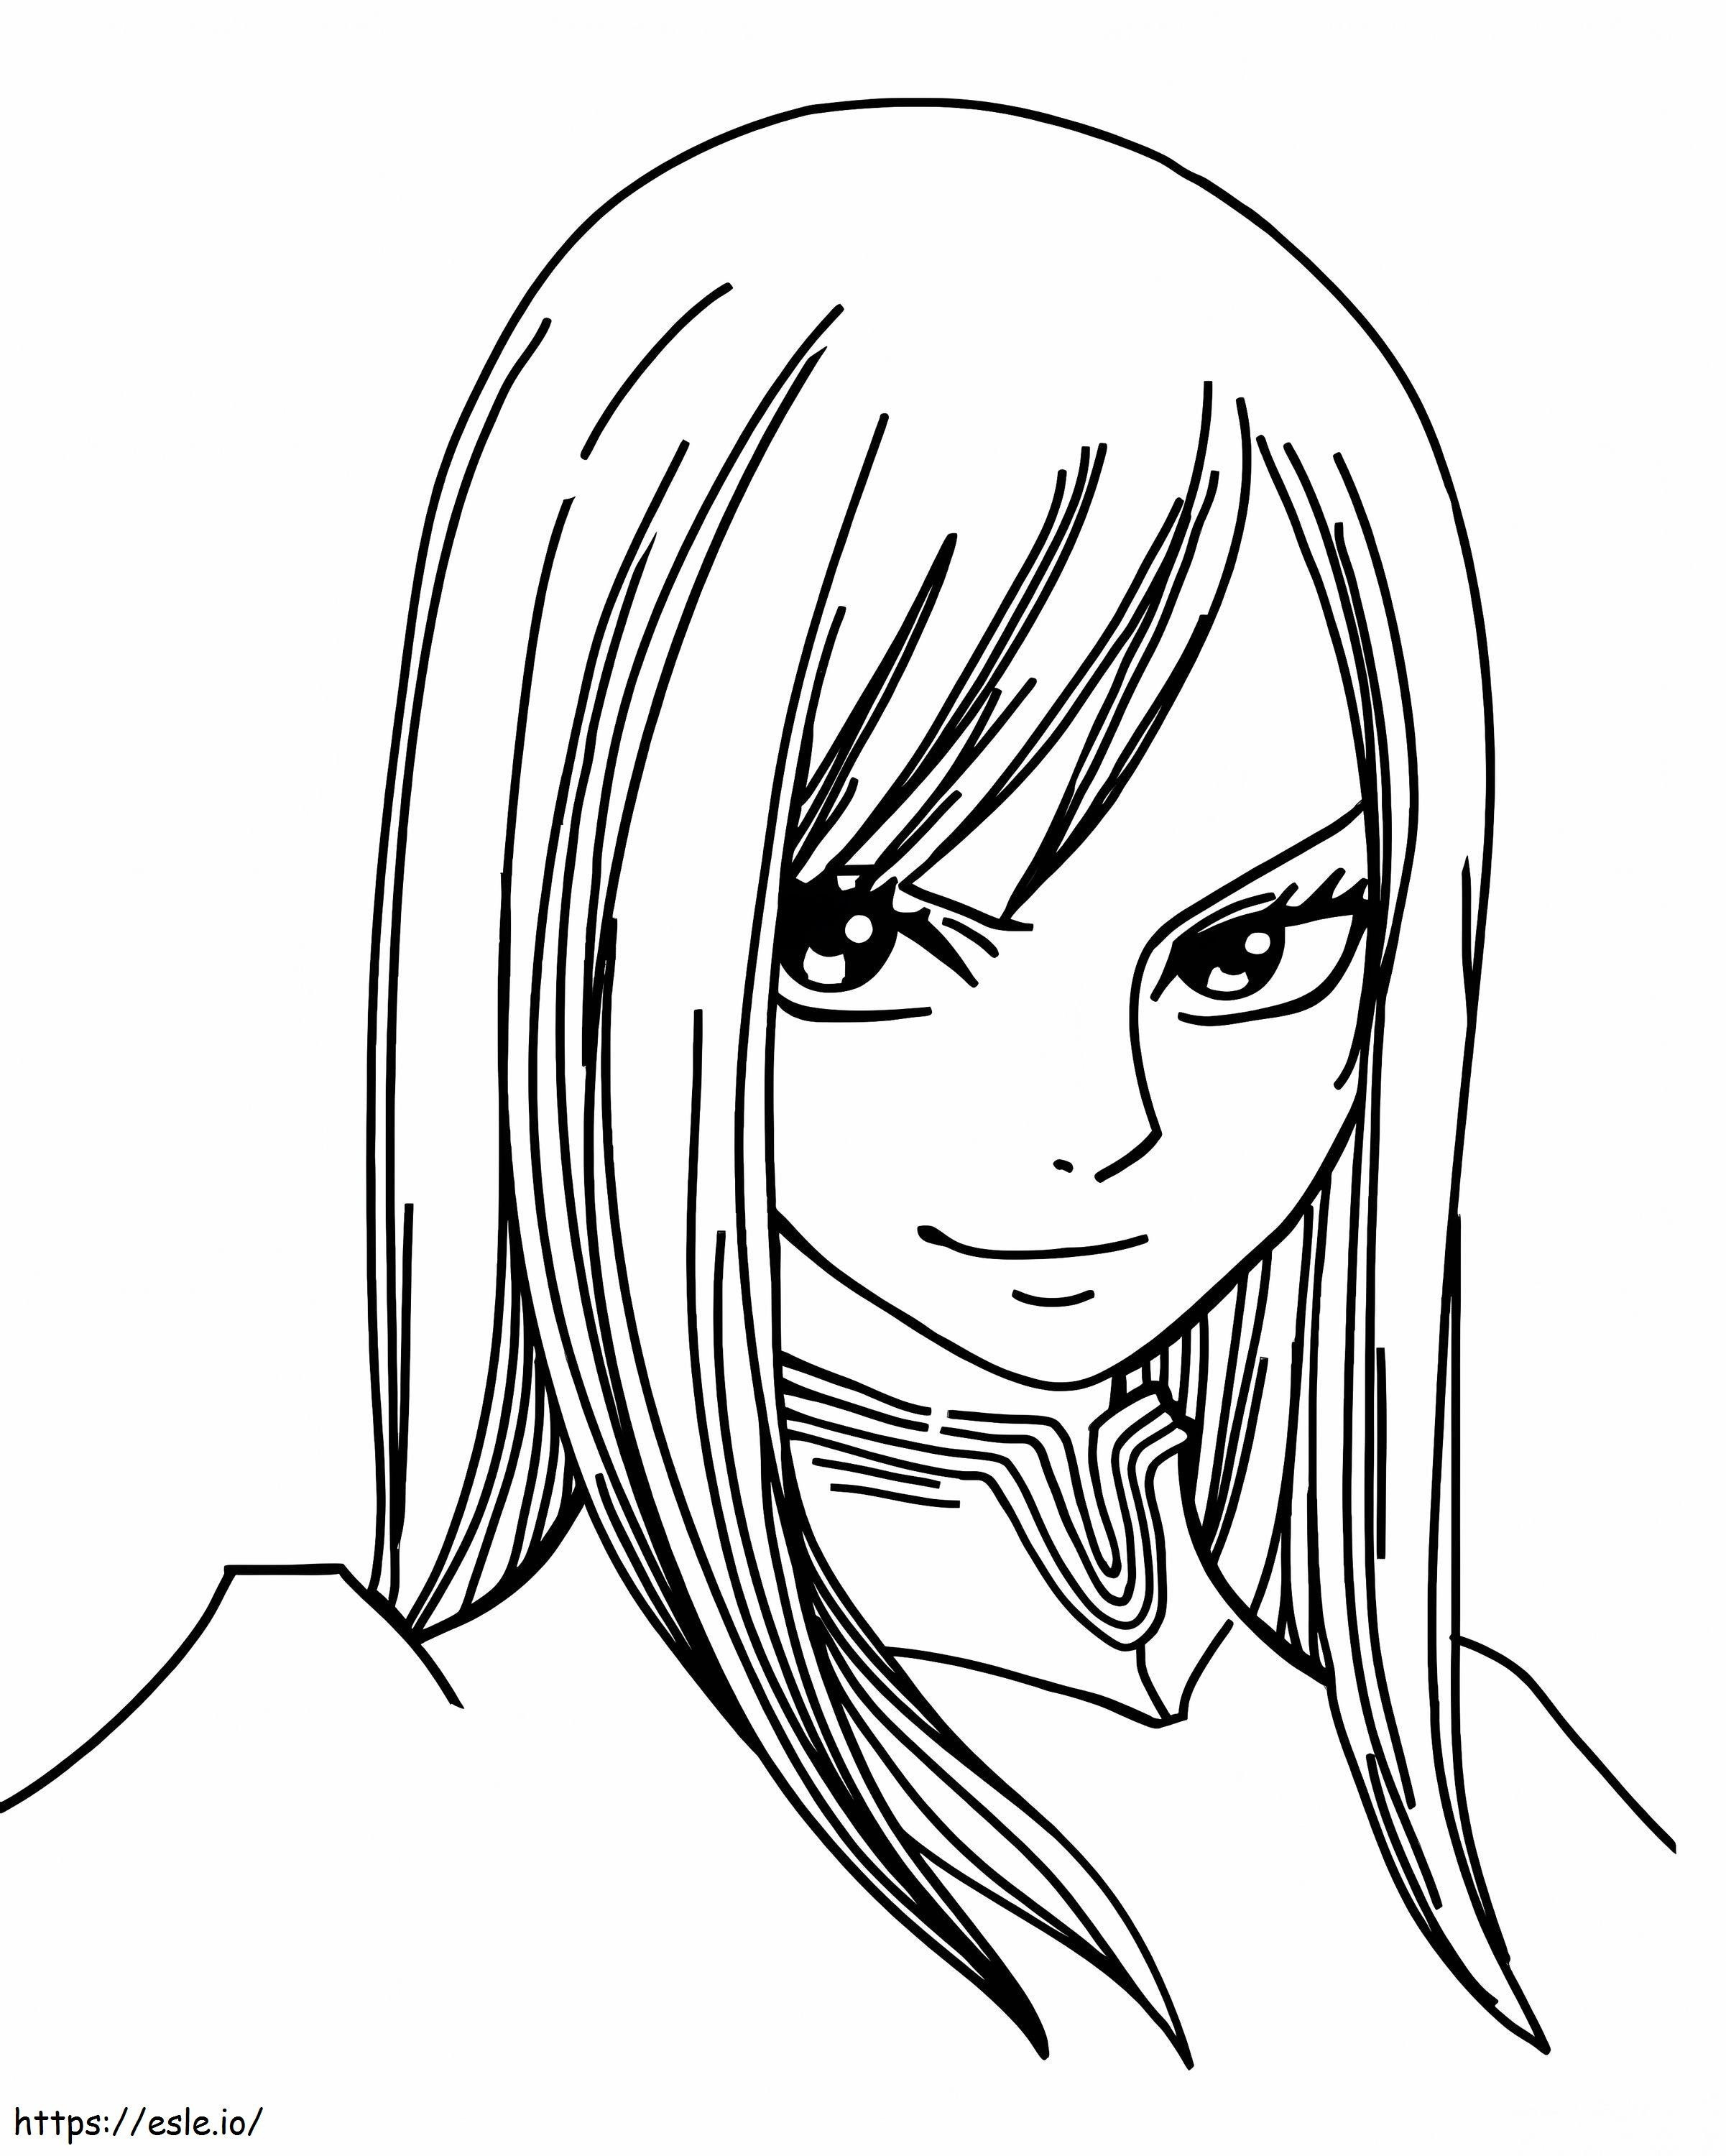 Erza Scarlet Smiling coloring page